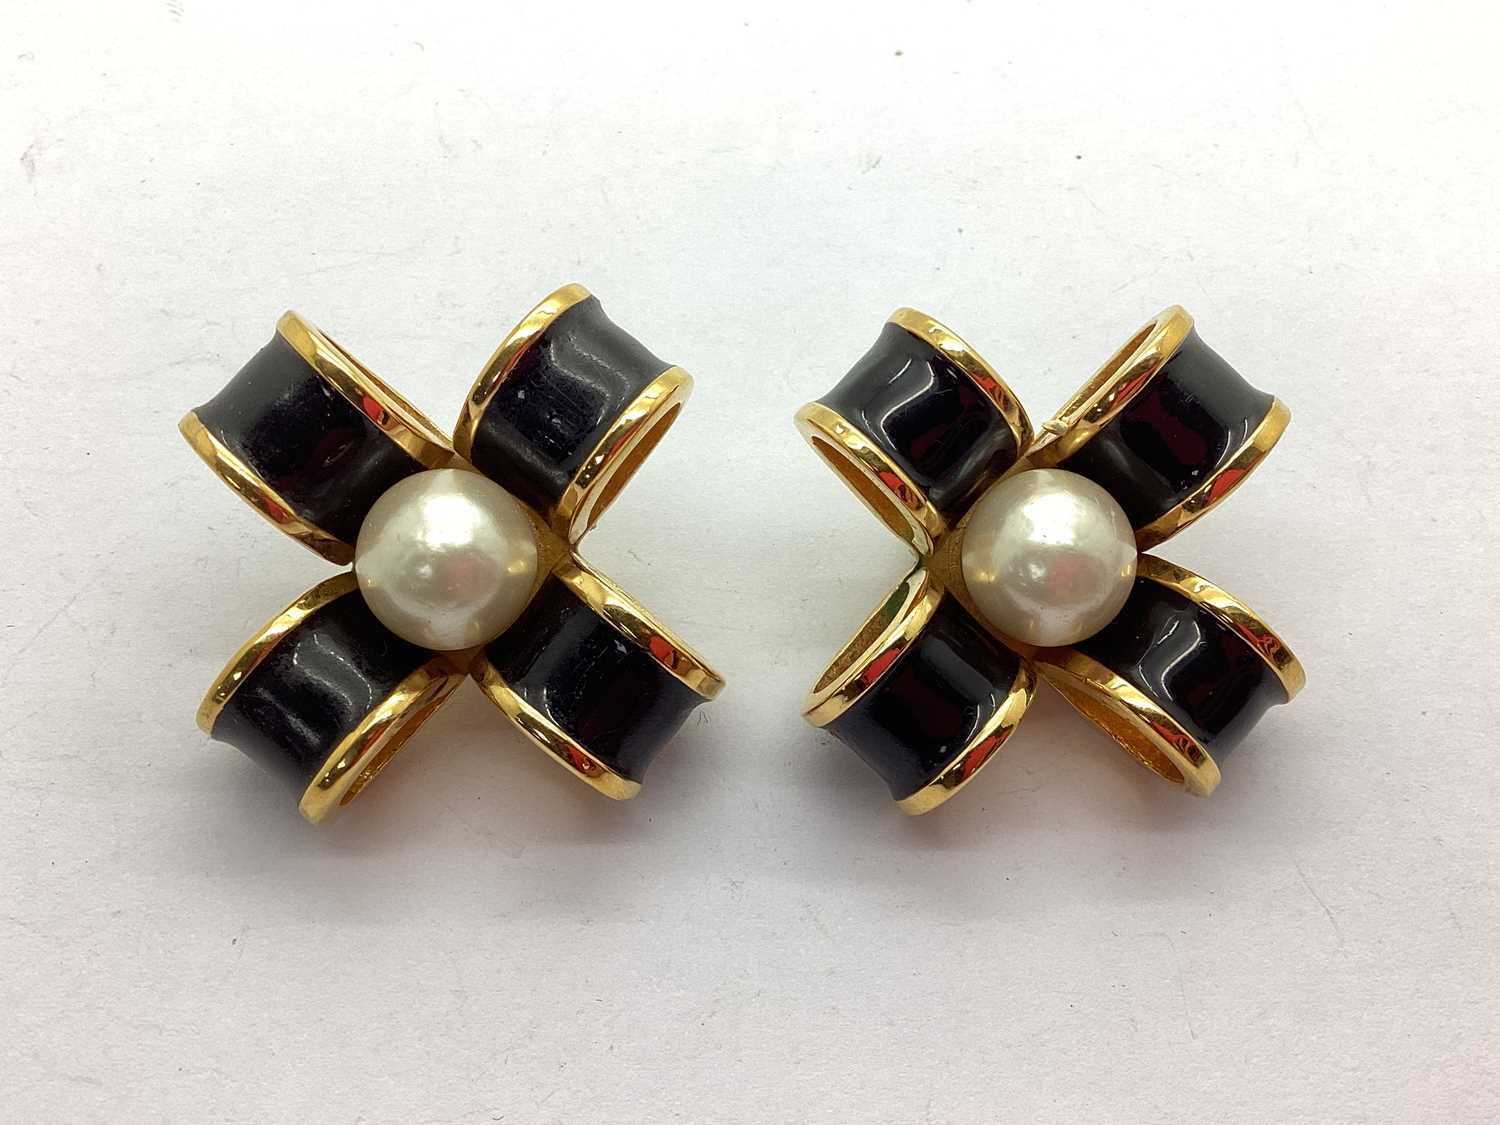 Chanel; A Pair of Black Enamel and Imitation Pearl Bow Clip on Earrings. Yes hinges work as normal